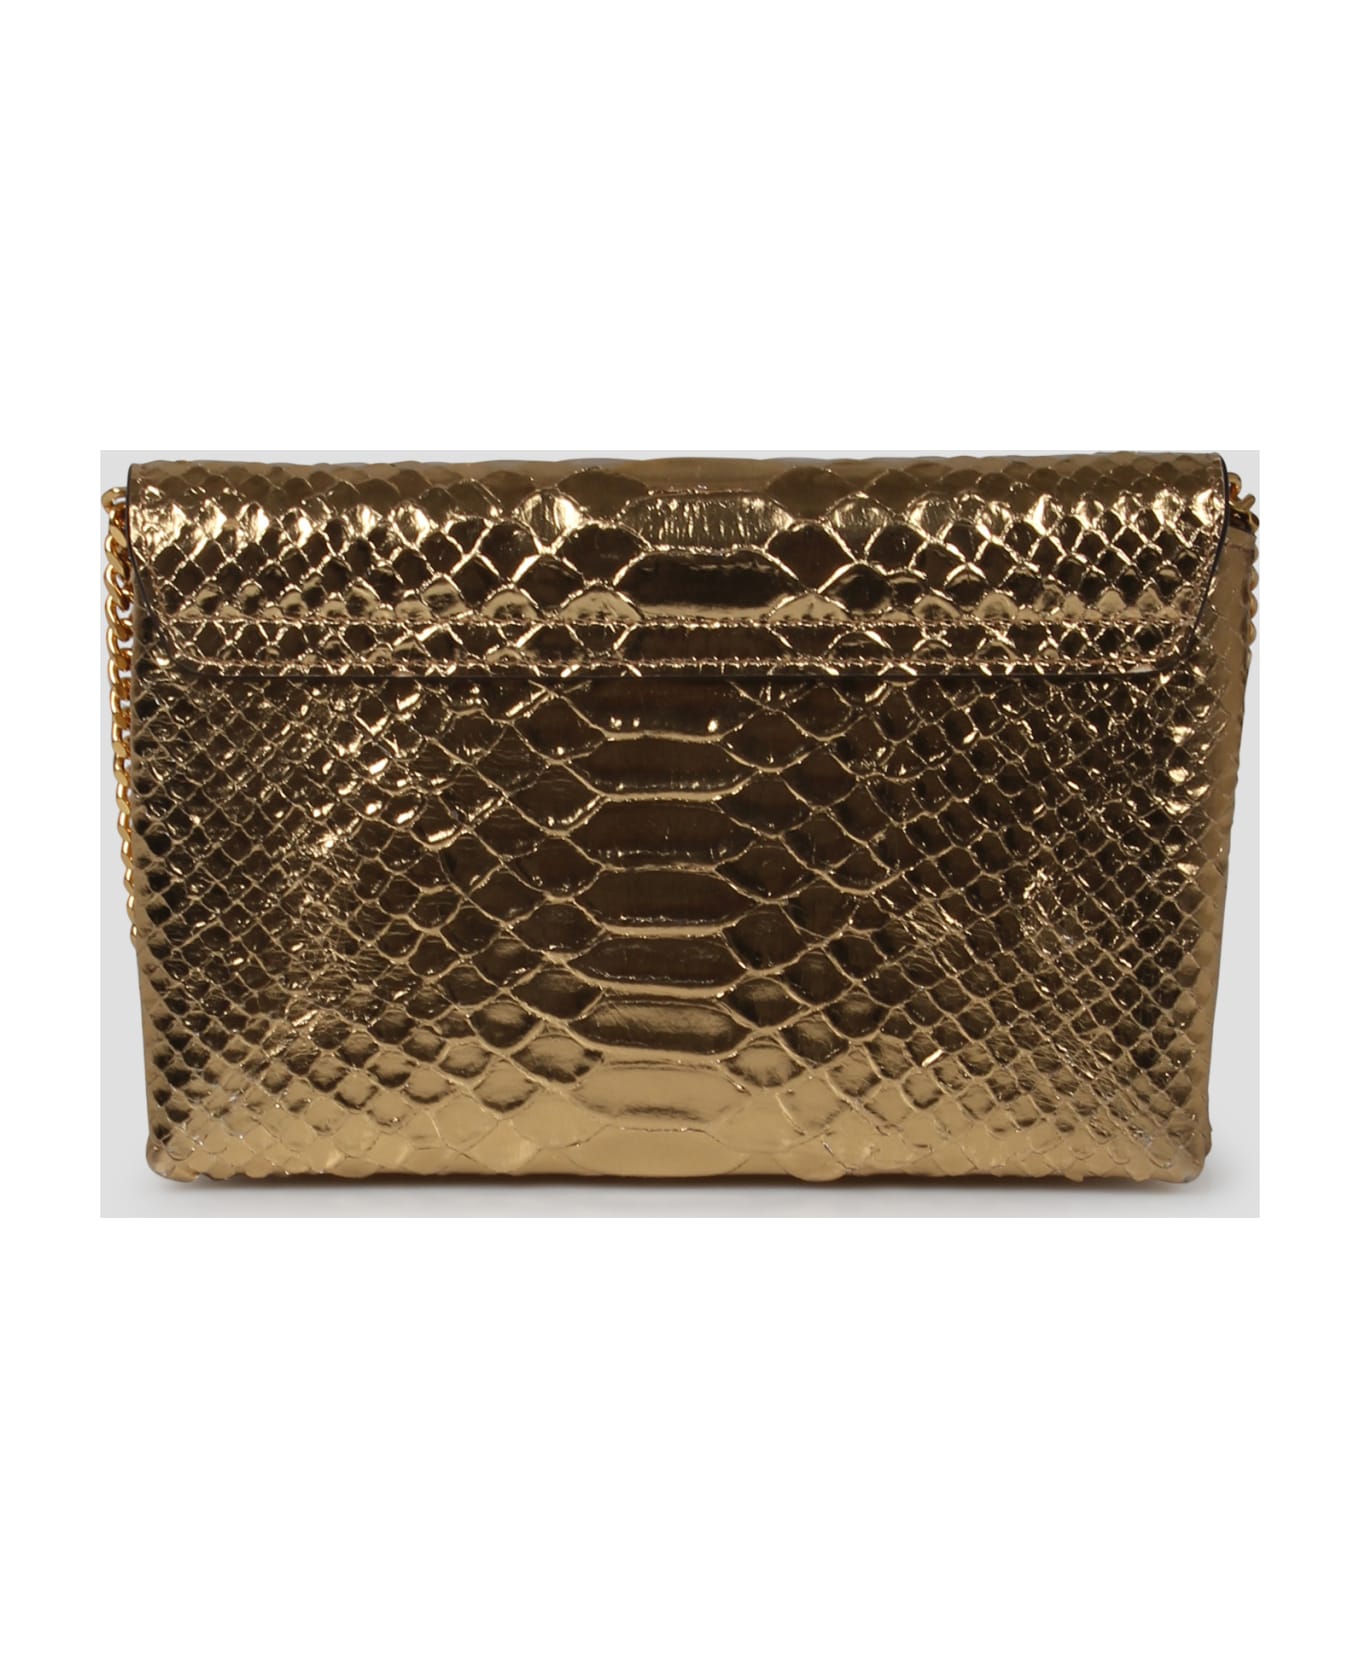 Tom Ford Laminated Stamped Python Leather Monarch Mini Bag - Metallic